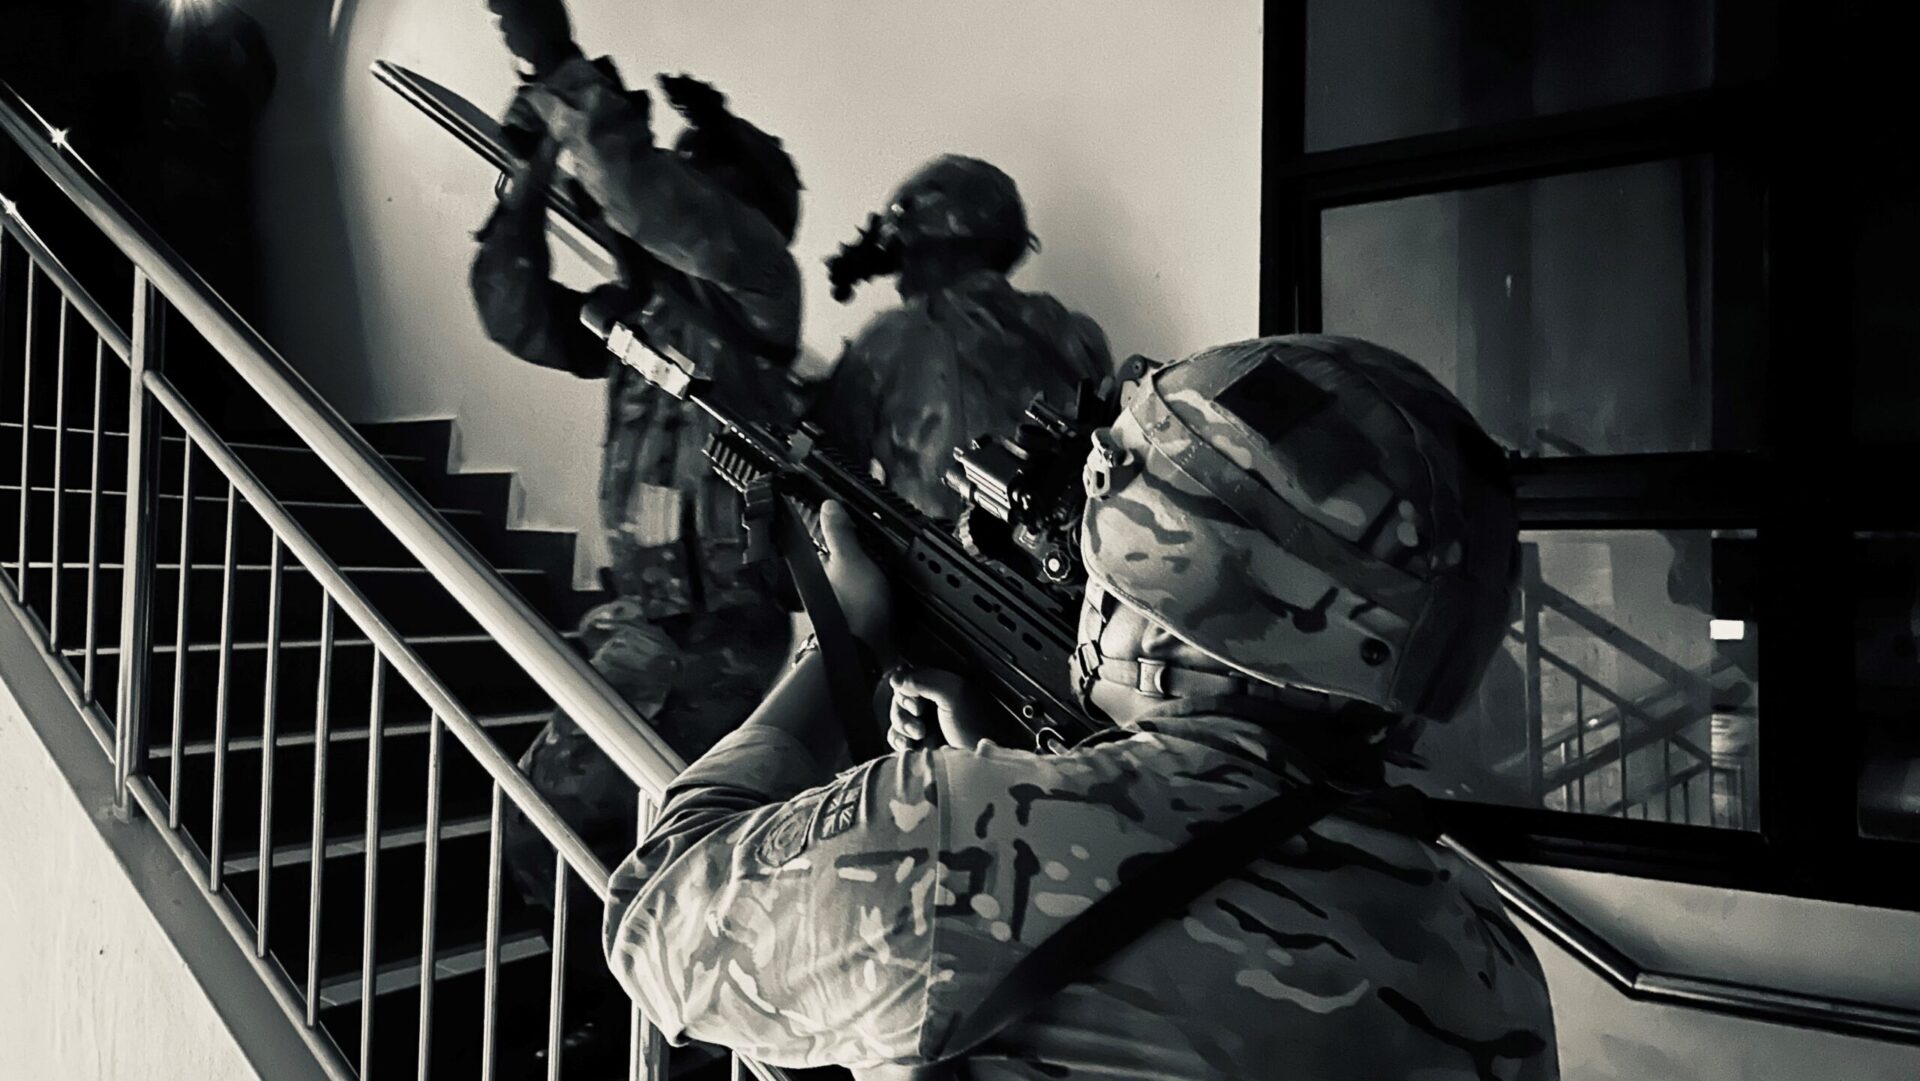 1 RGR, Royal Navy Personnel and US Special Forces - Urban Operations Training